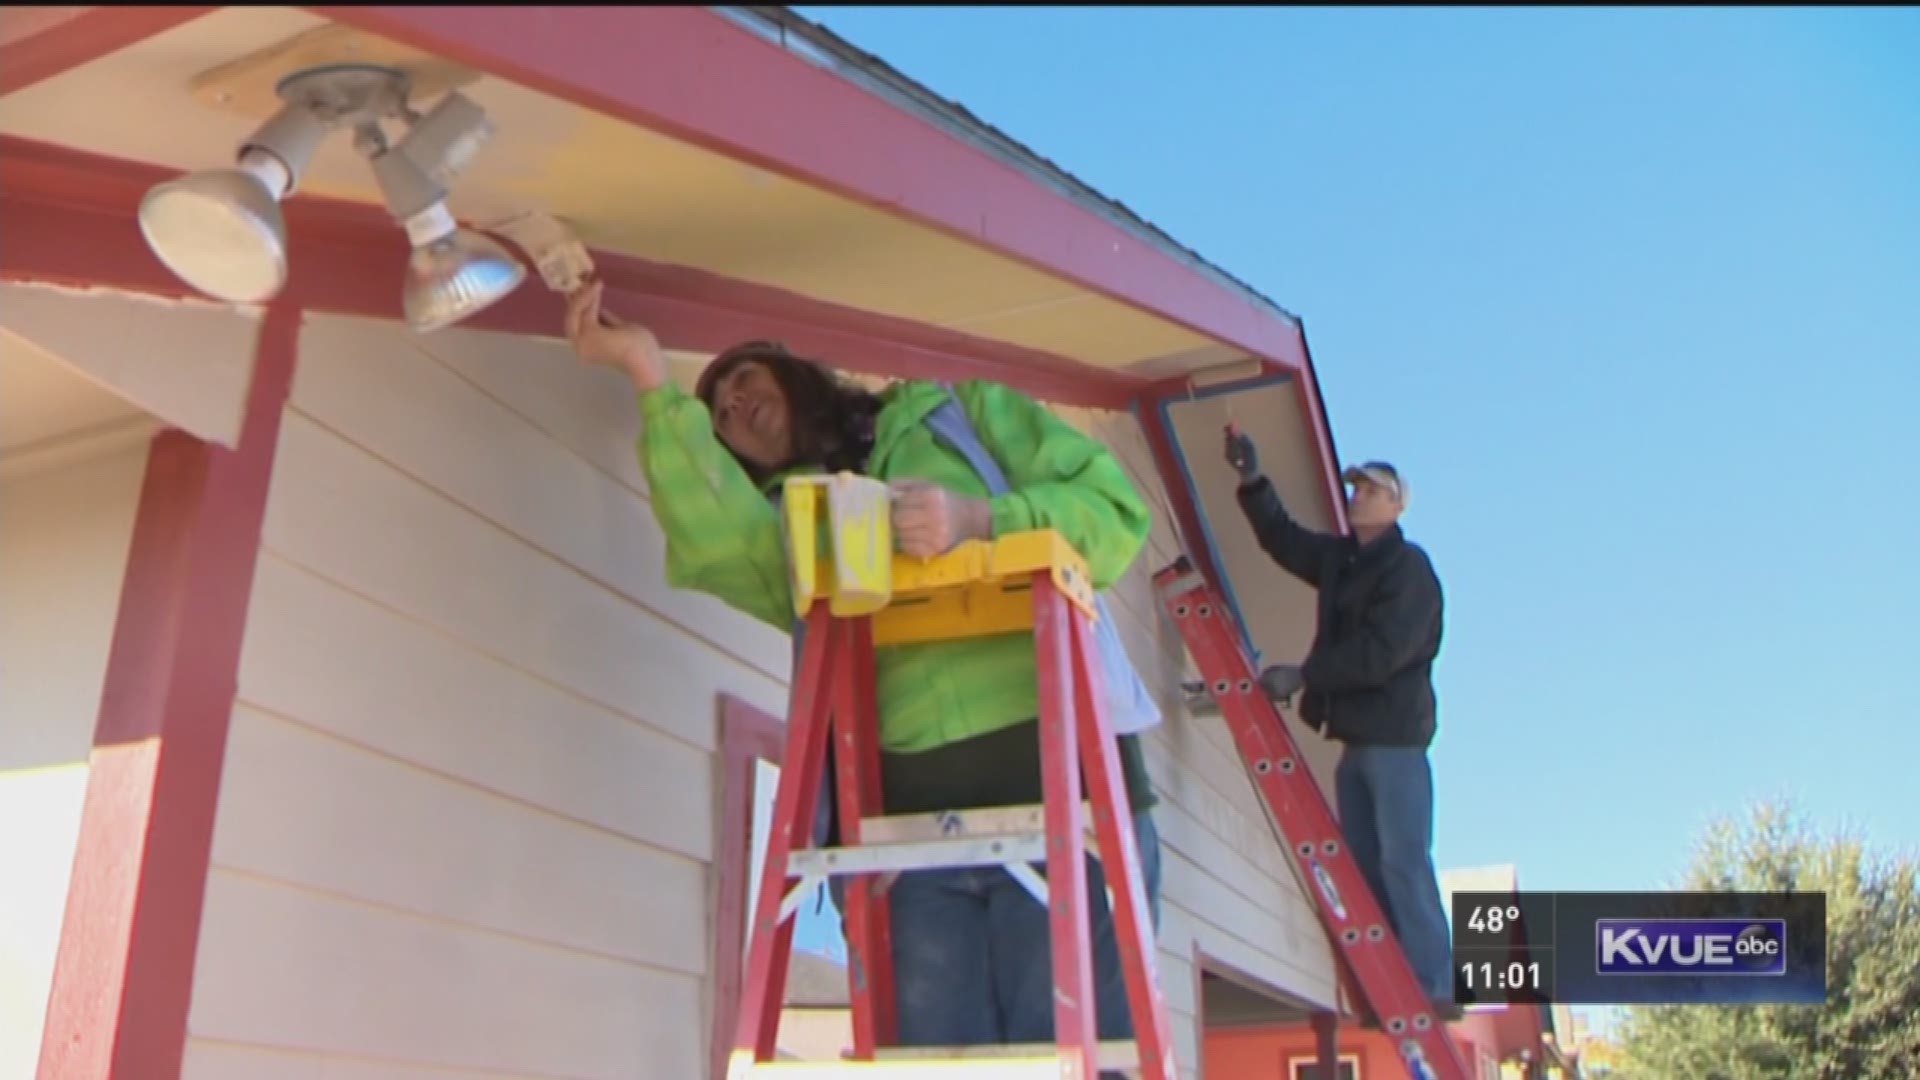 Two deserving families received a new home Friday after weeks of hard work on both the families' and volunteers' part.